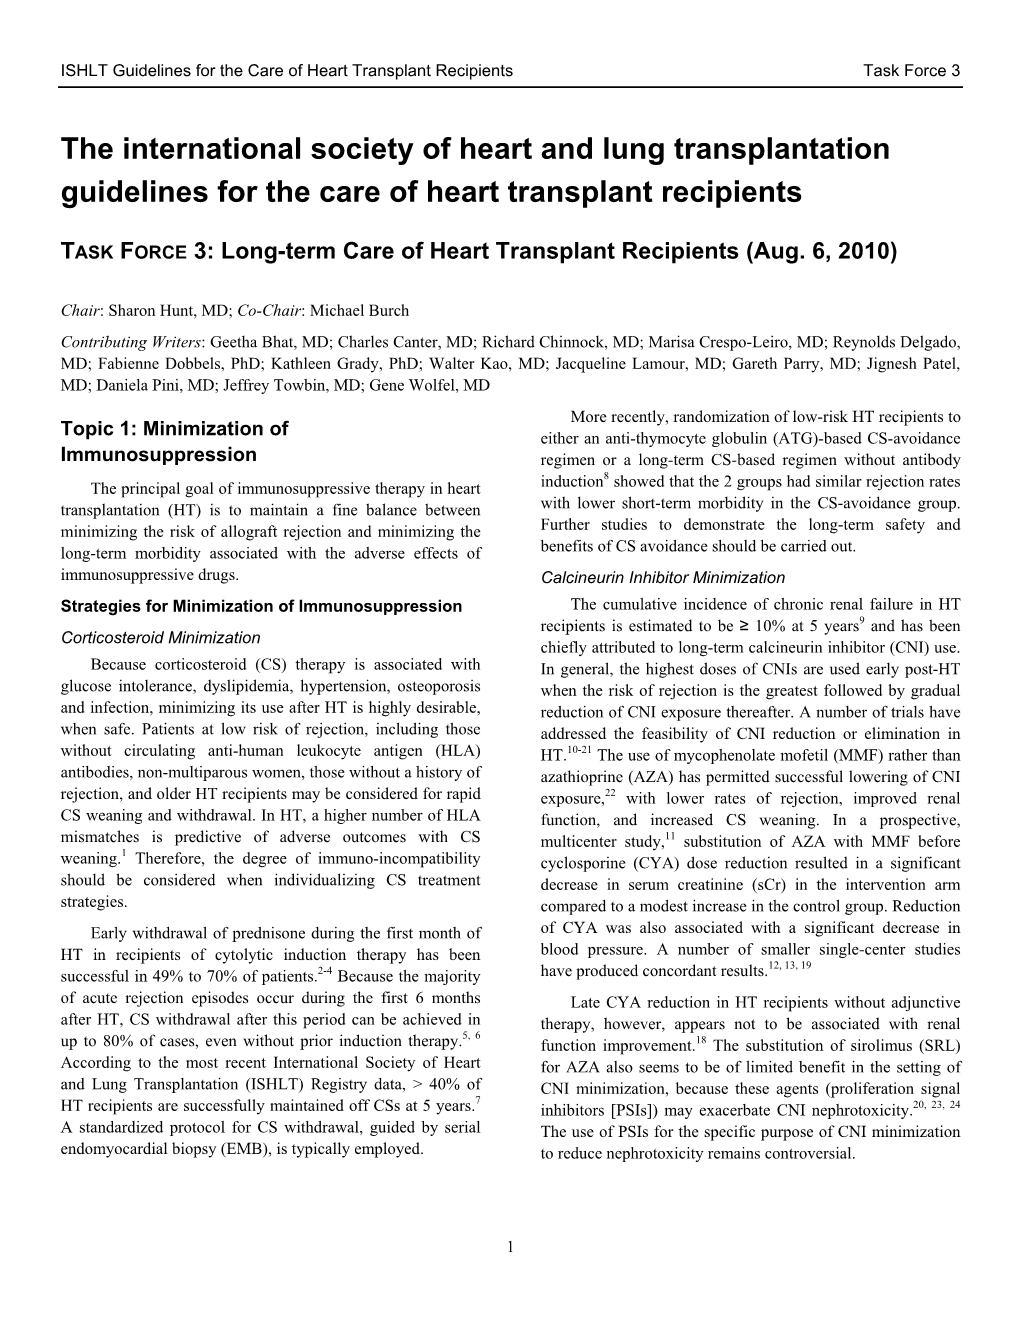 The International Society of Heart and Lung Transplantation Guidelines for the Care of Heart Transplant Recipients